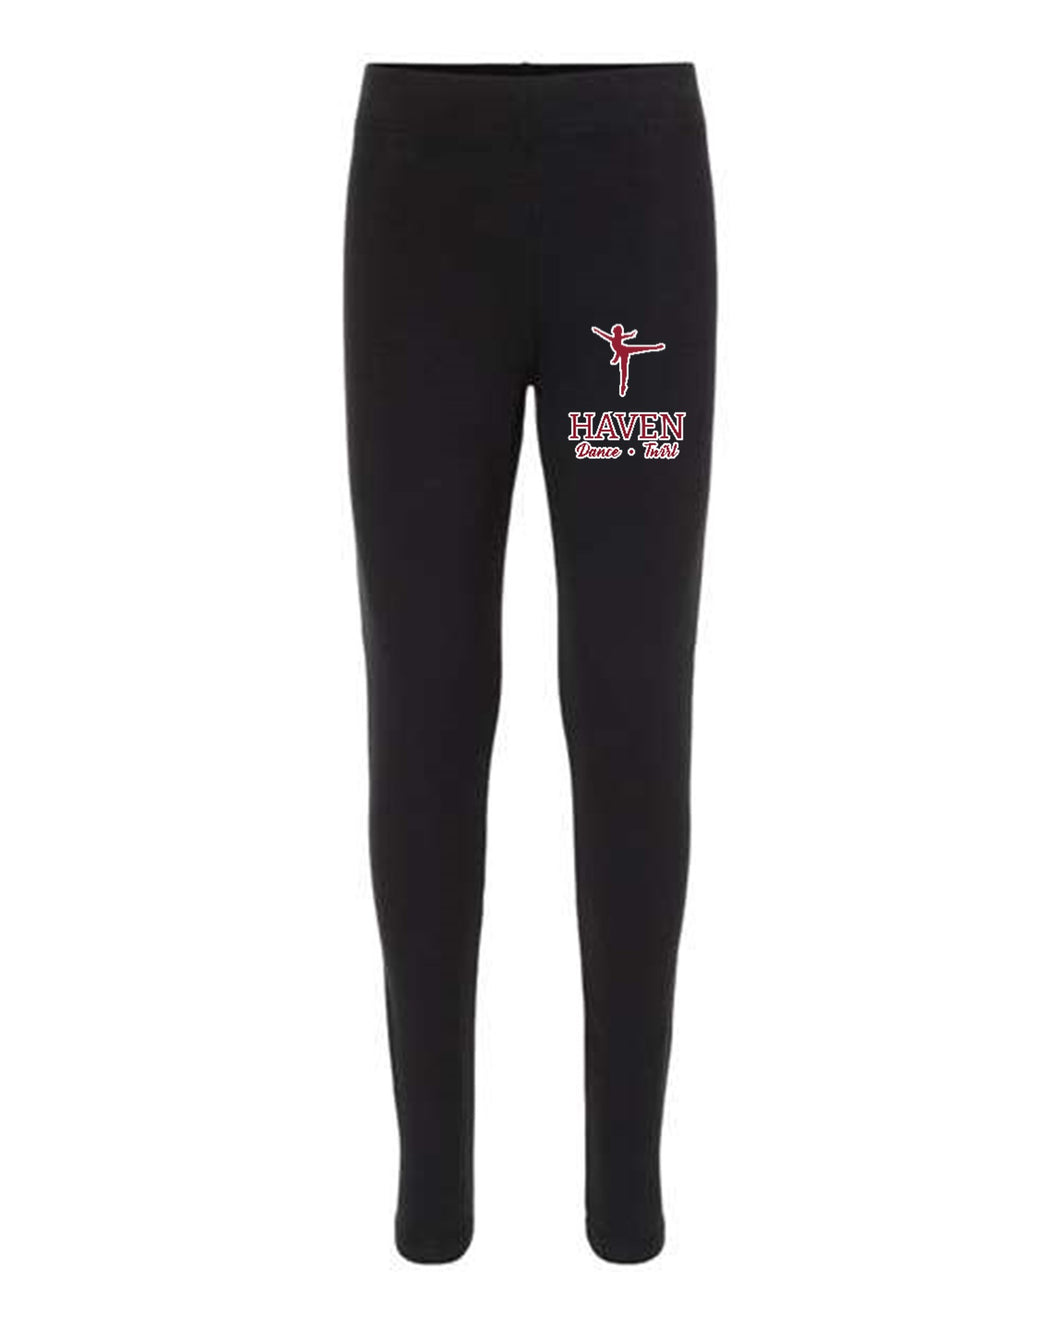 Haven Dance and Twirl Leggings Style 1 - Youth and Adult